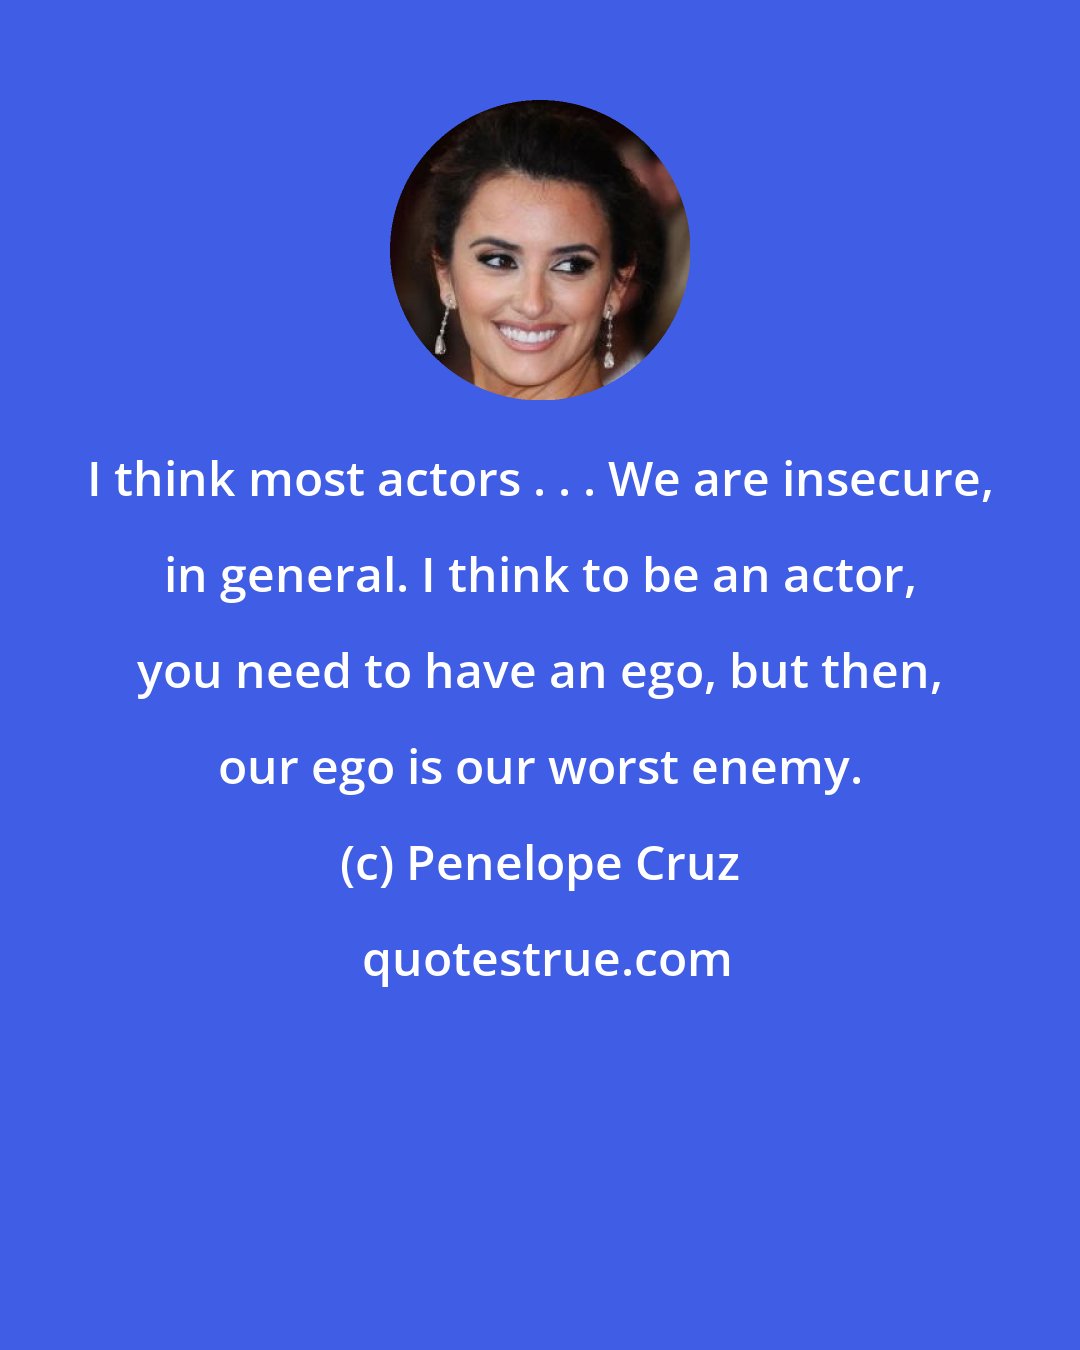 Penelope Cruz: I think most actors . . . We are insecure, in general. I think to be an actor, you need to have an ego, but then, our ego is our worst enemy.